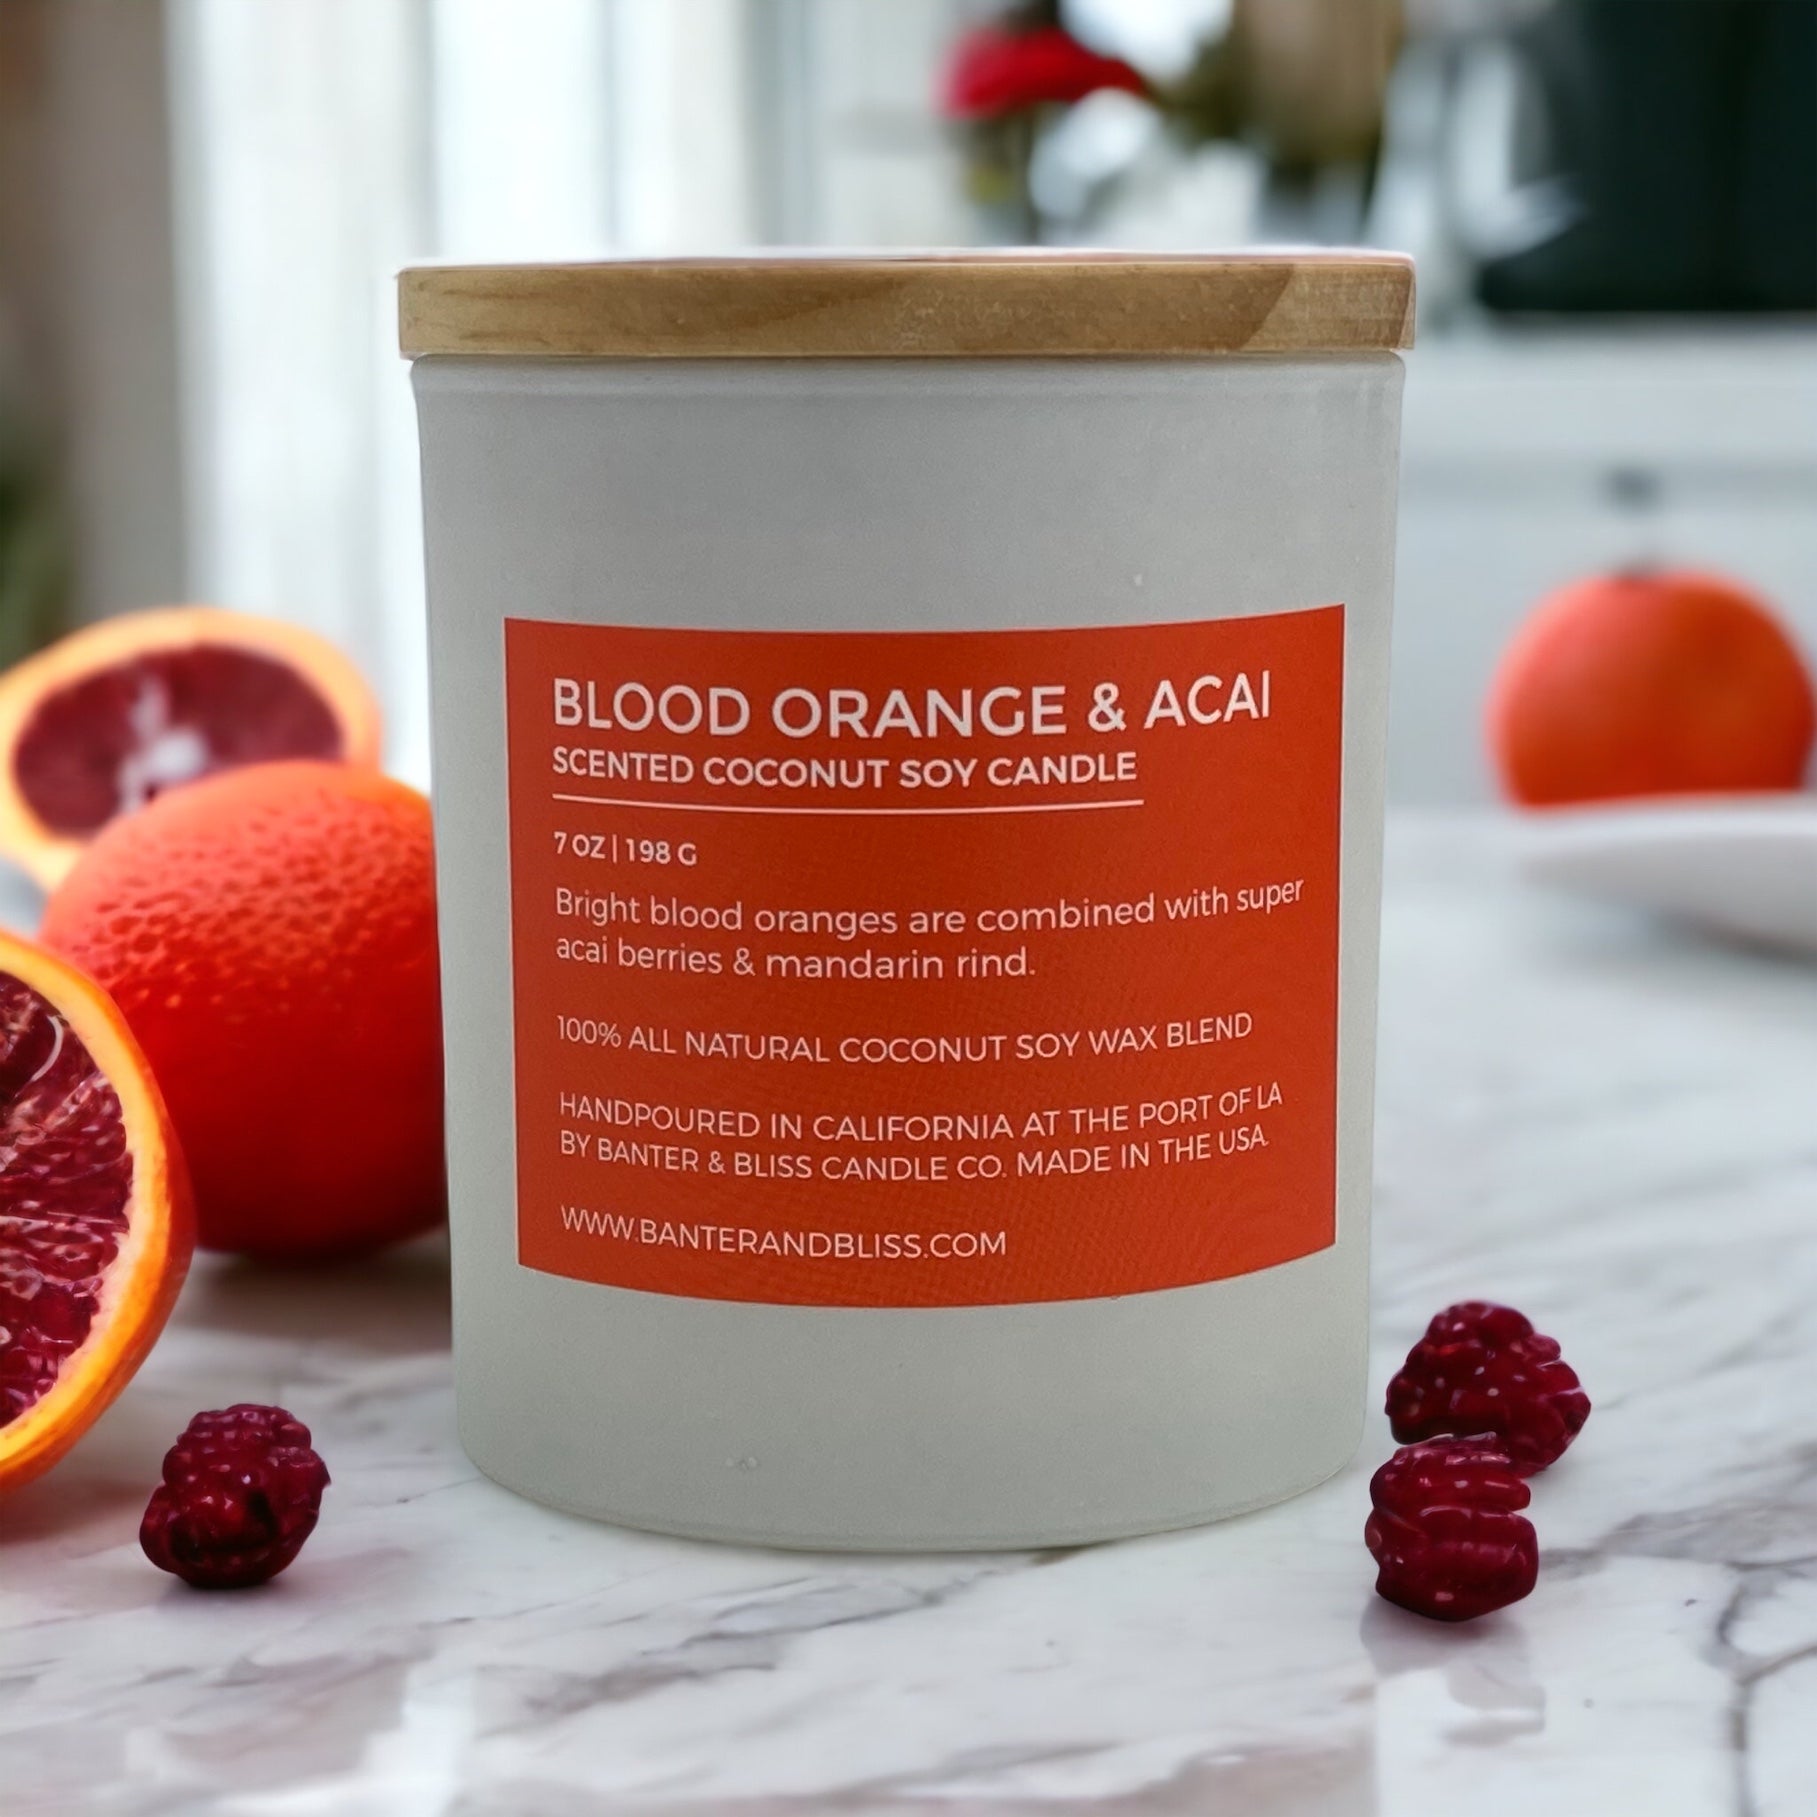 Banter & Bliss Candle Co. Blood Orange & Acai. 7 oz. Scented Coconut Soy Candle.